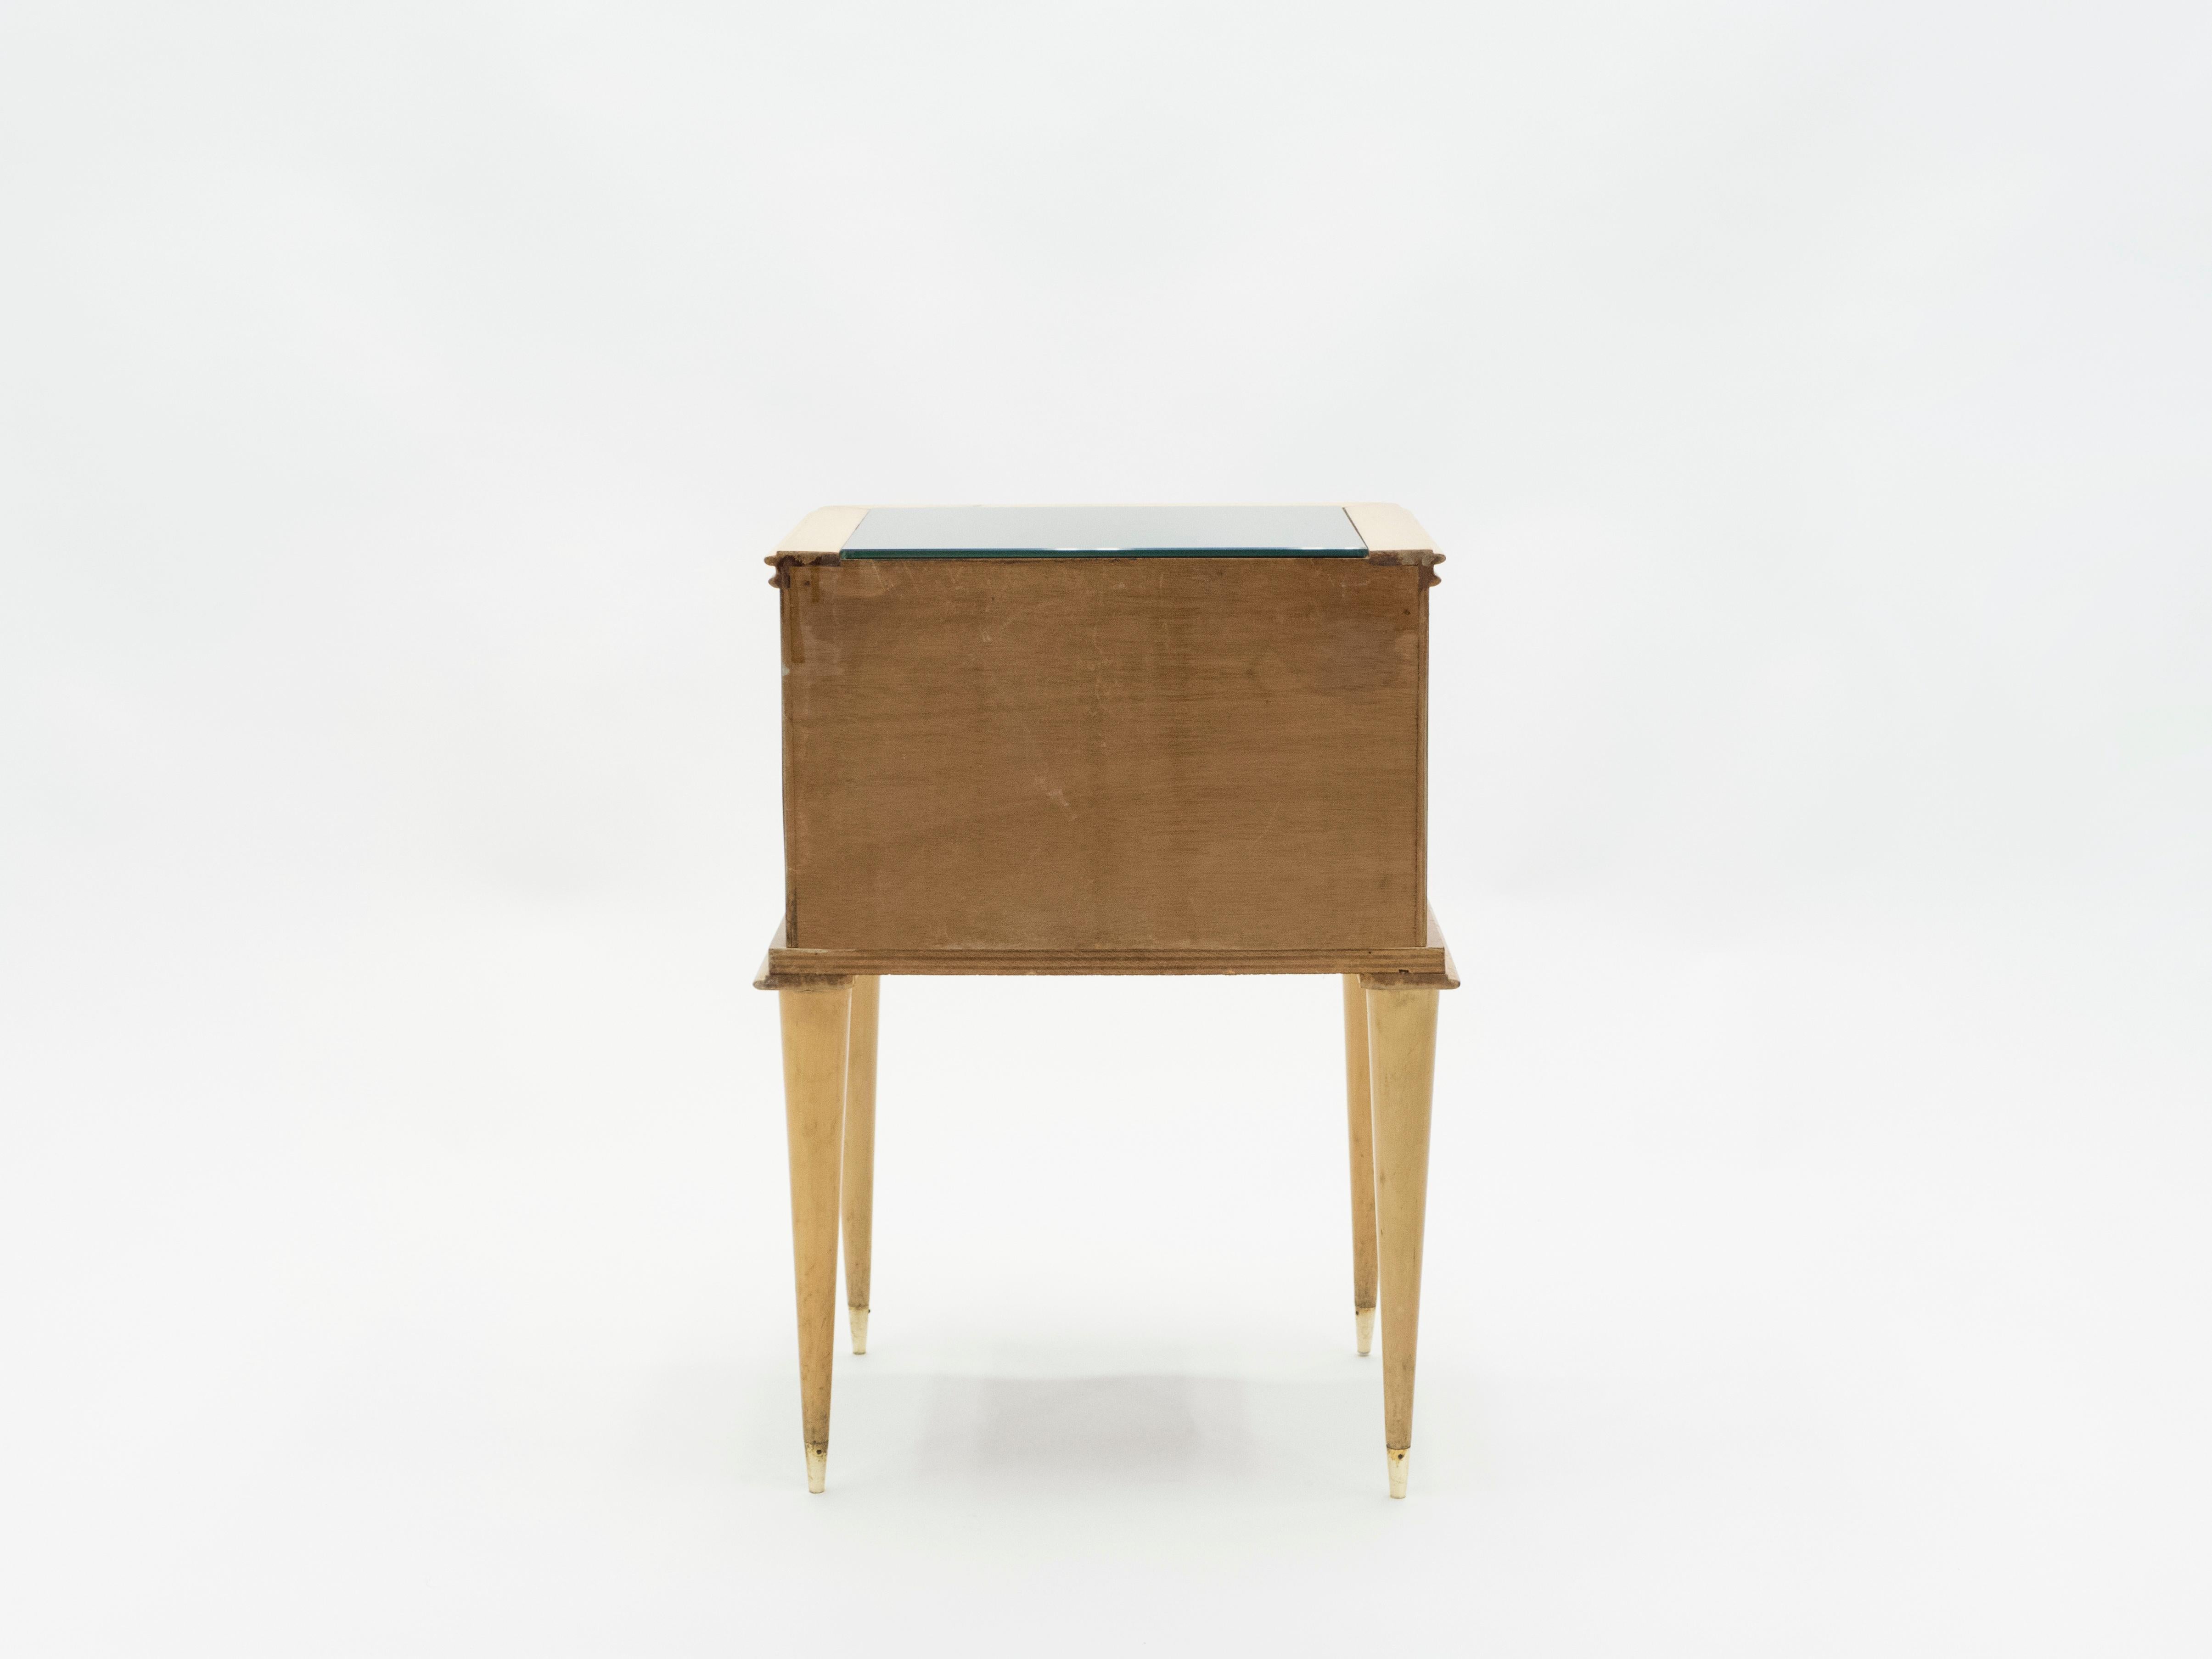 French Sycamore Nightstands 2 Drawers Attributed to Suzanne Guiguichon, 1950s For Sale 5